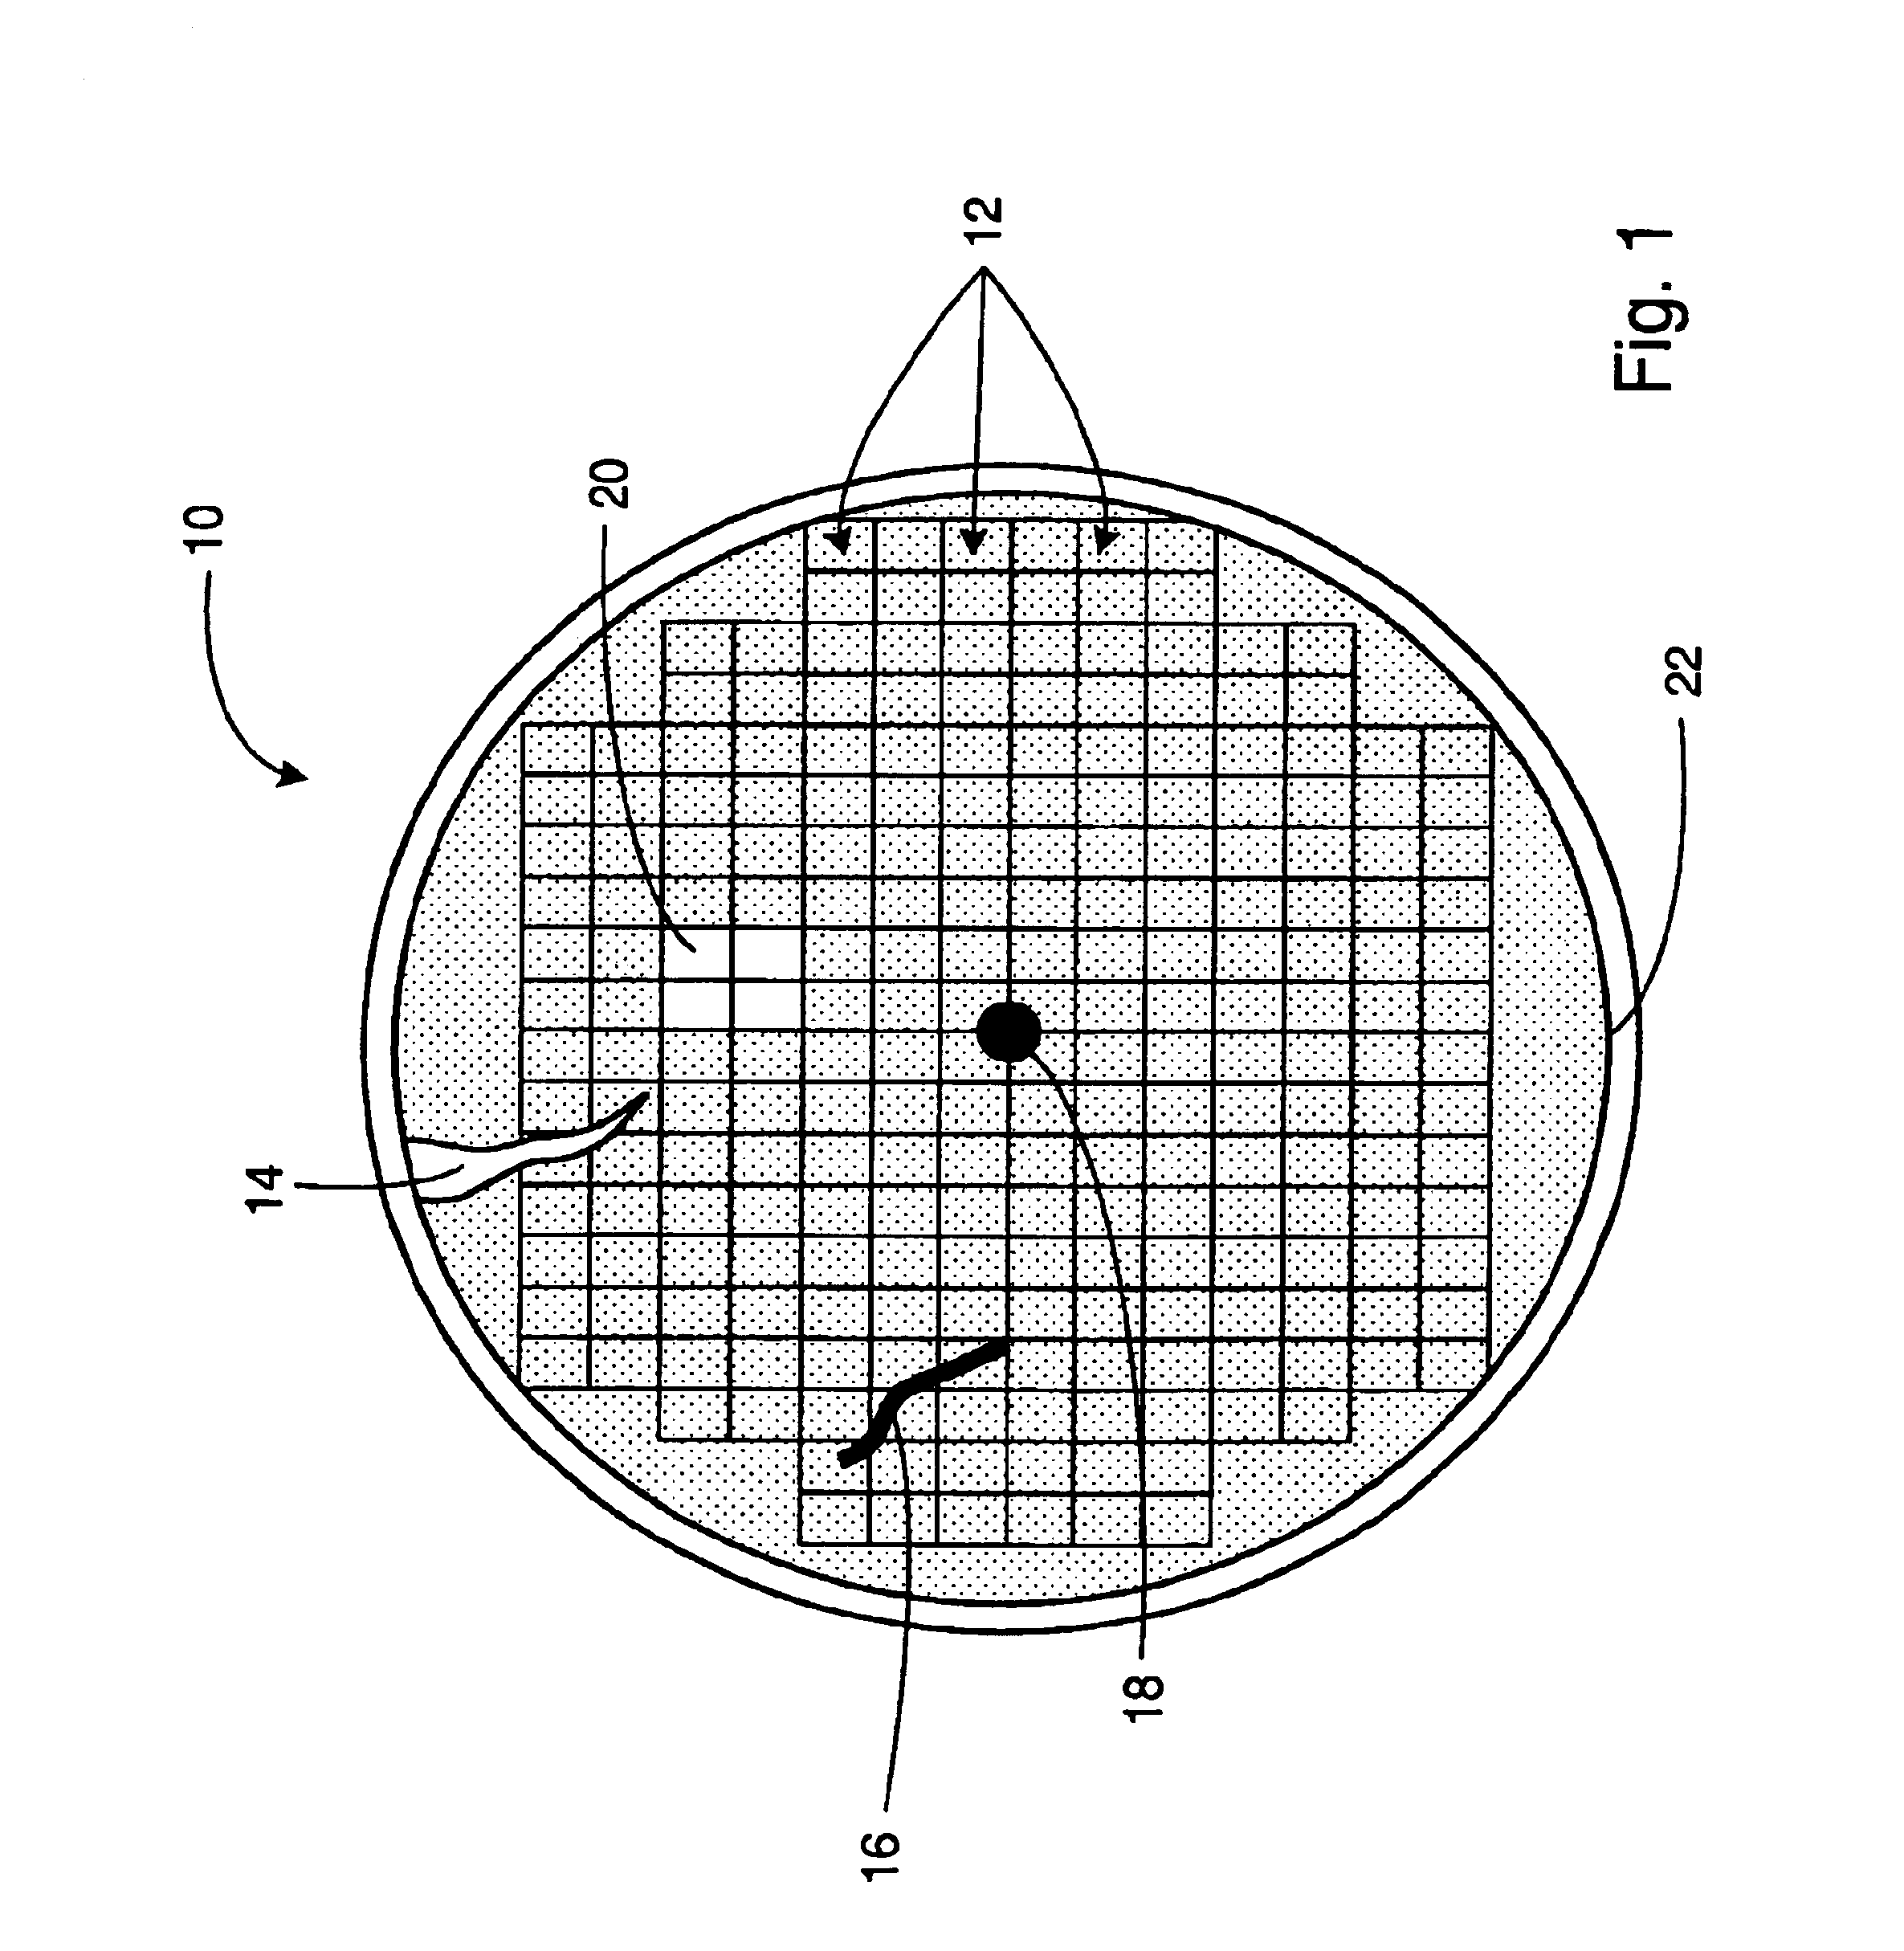 Methods and systems for determining a critical dimension, a presence of defects, and a thin film characteristic of a specimen